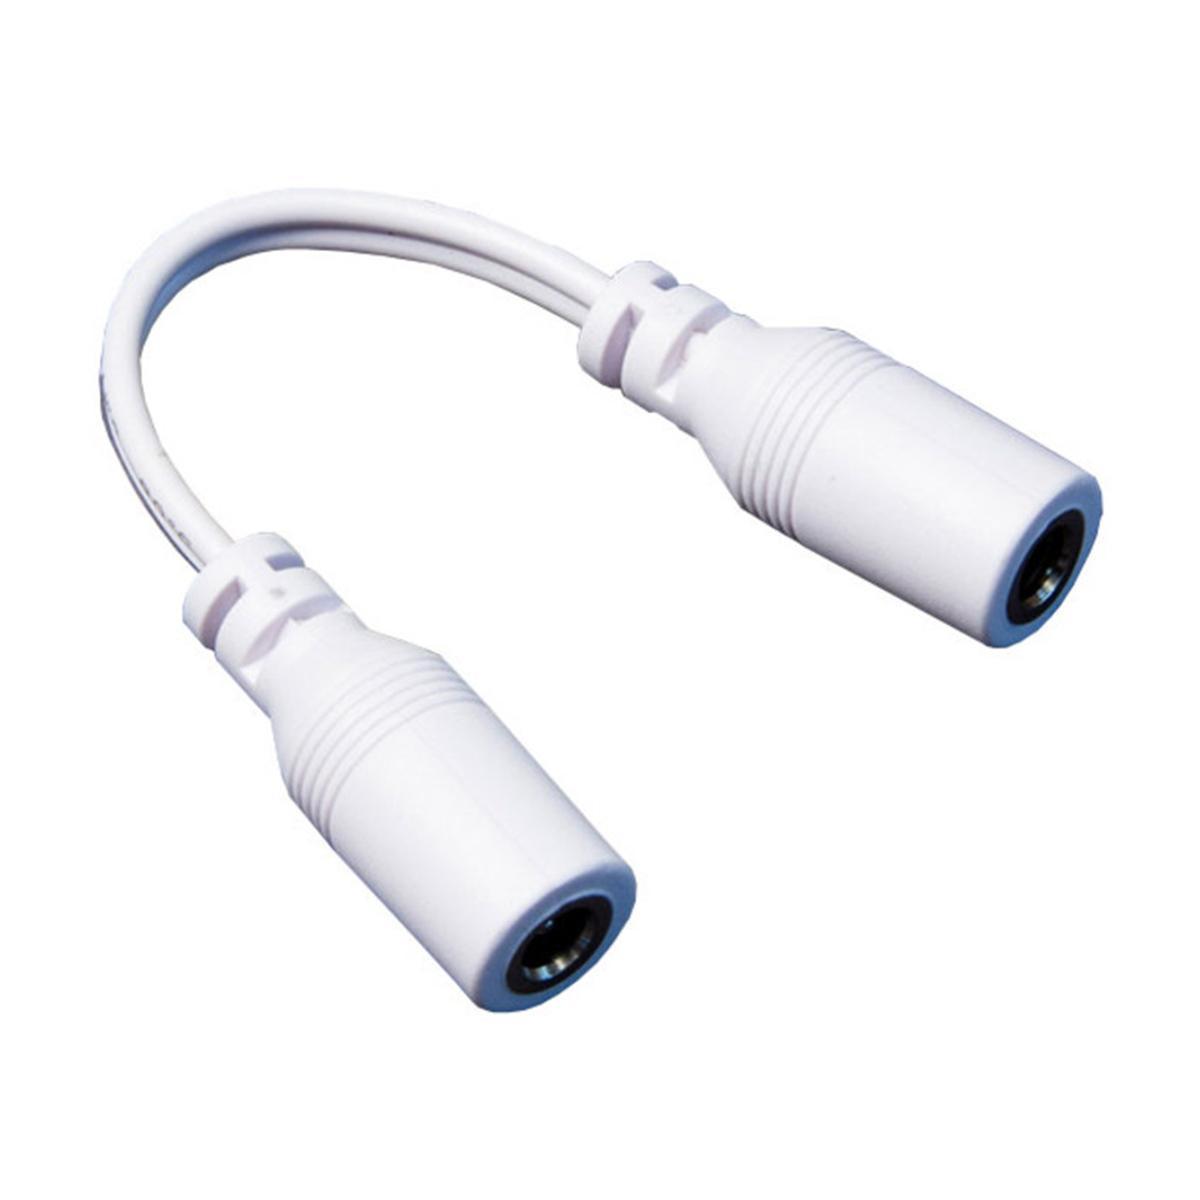 3in. female to female Cable Connector For GM Under Cabinet Lighting, White - Bees Lighting